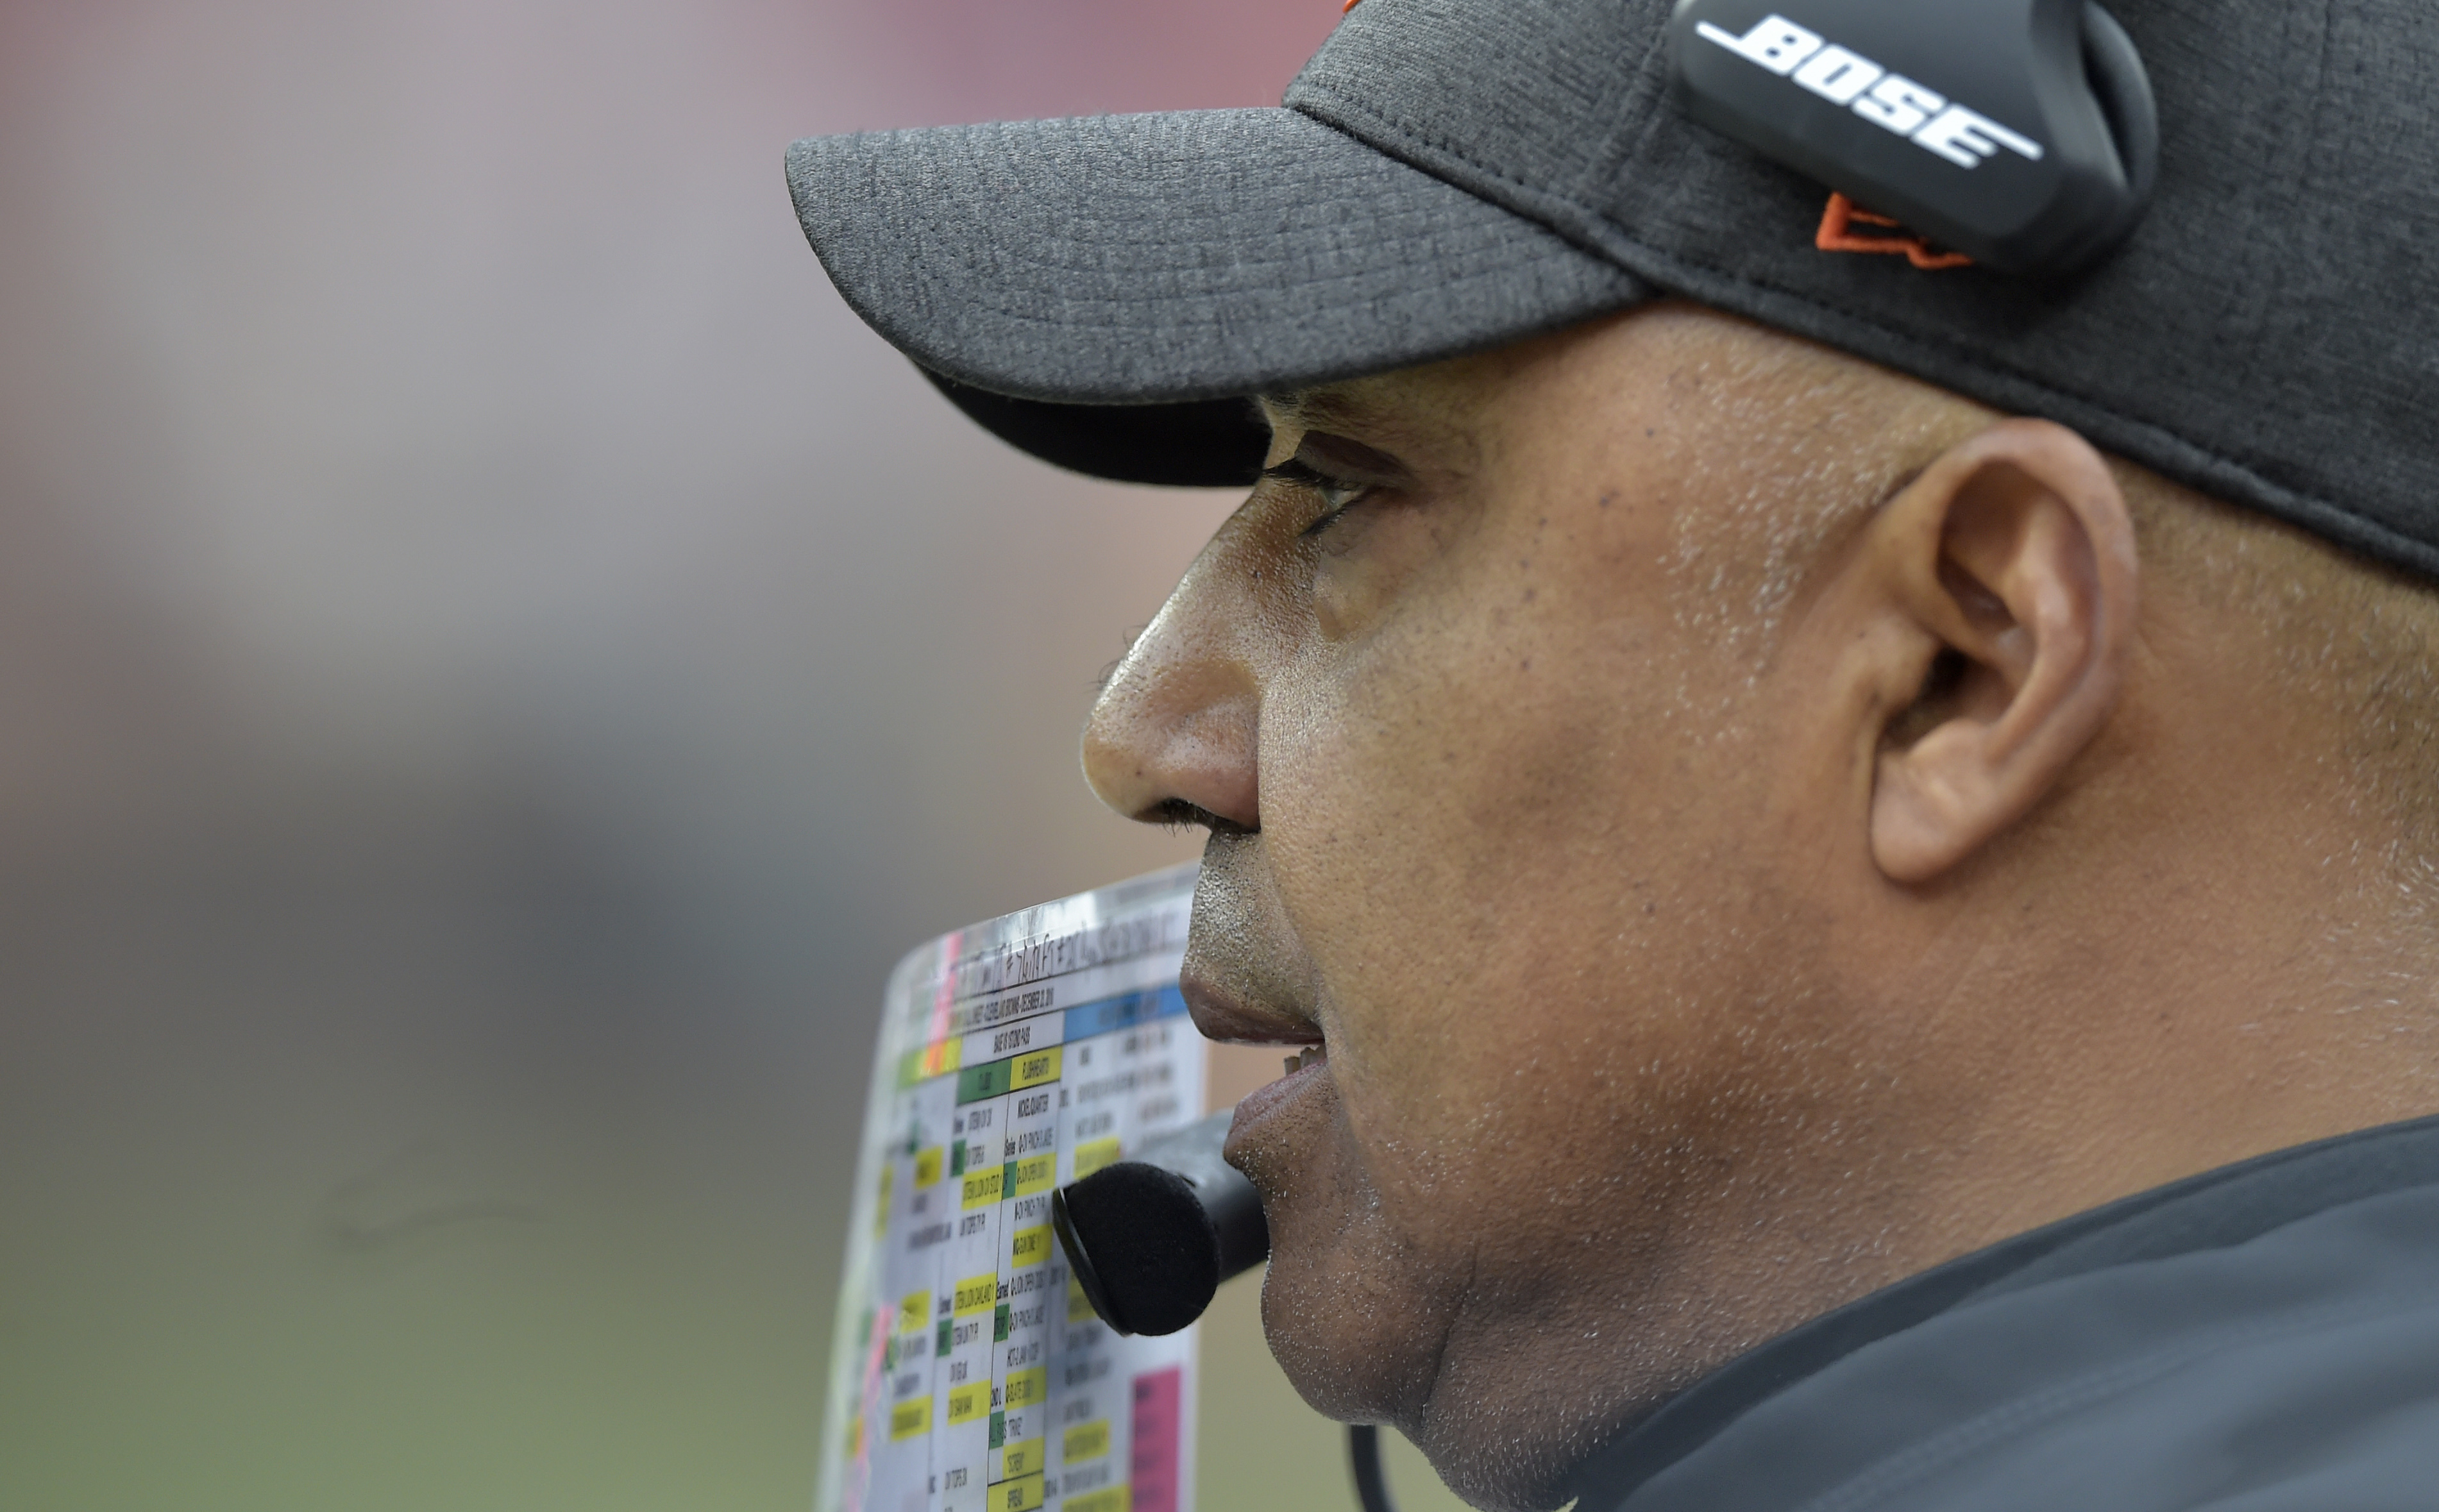 Bengals clinch last place, adding intrigue to Lewis' fate